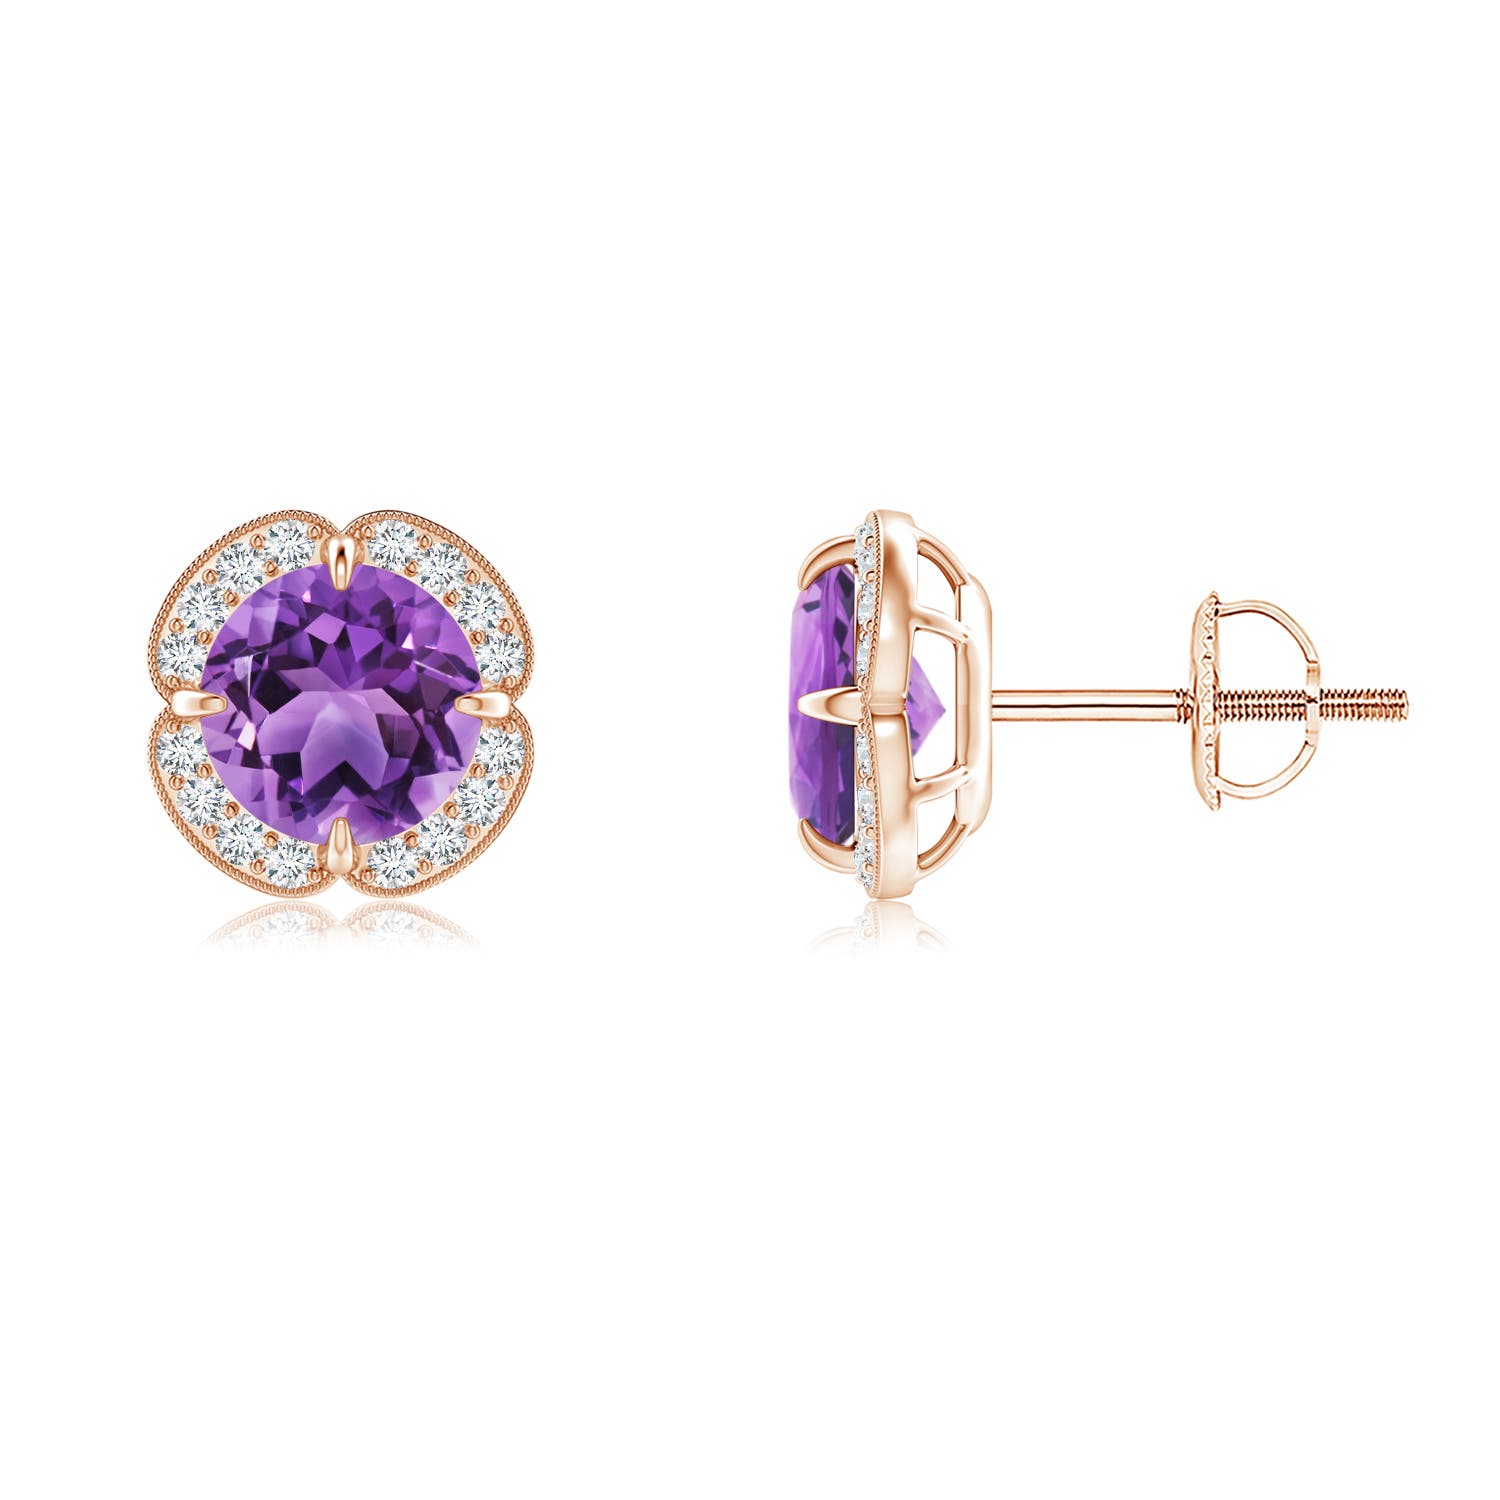 AA - Amethyst / 1.79 CT / 14 KT Rose Gold